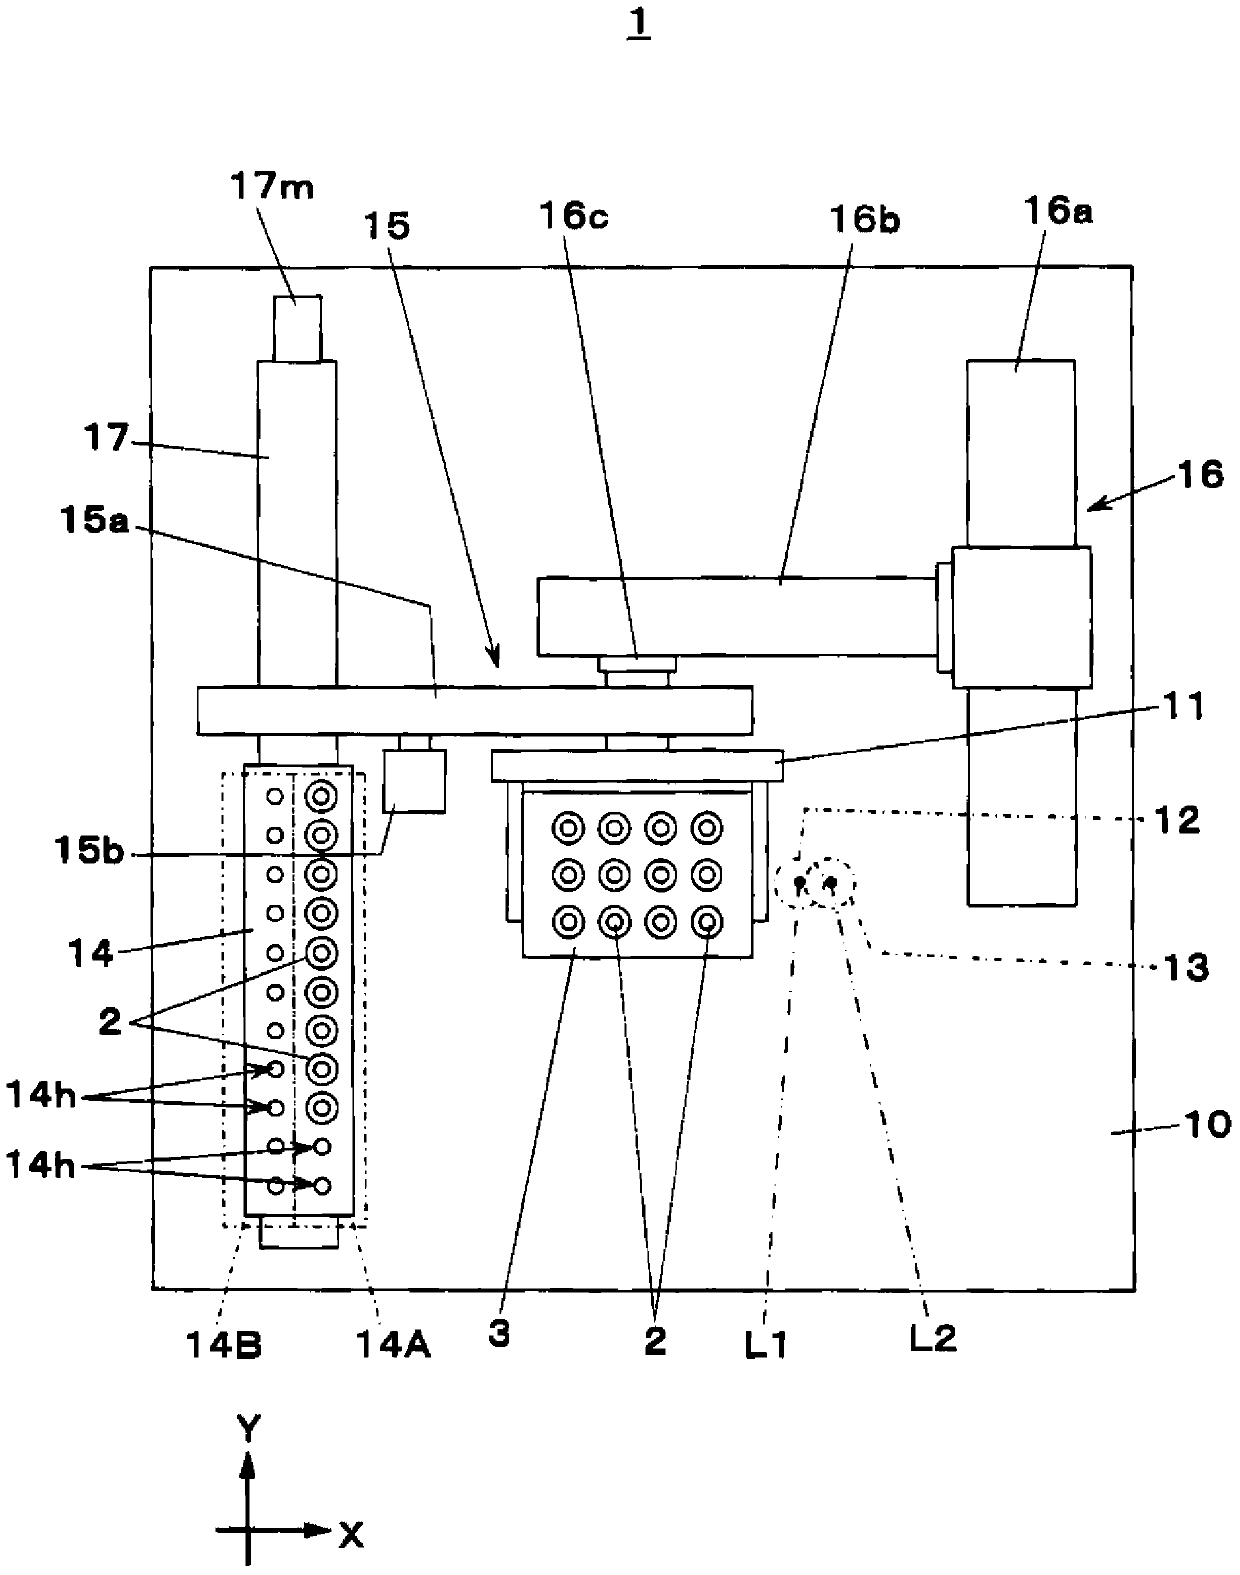 Nozzle inspection device and component mounting system